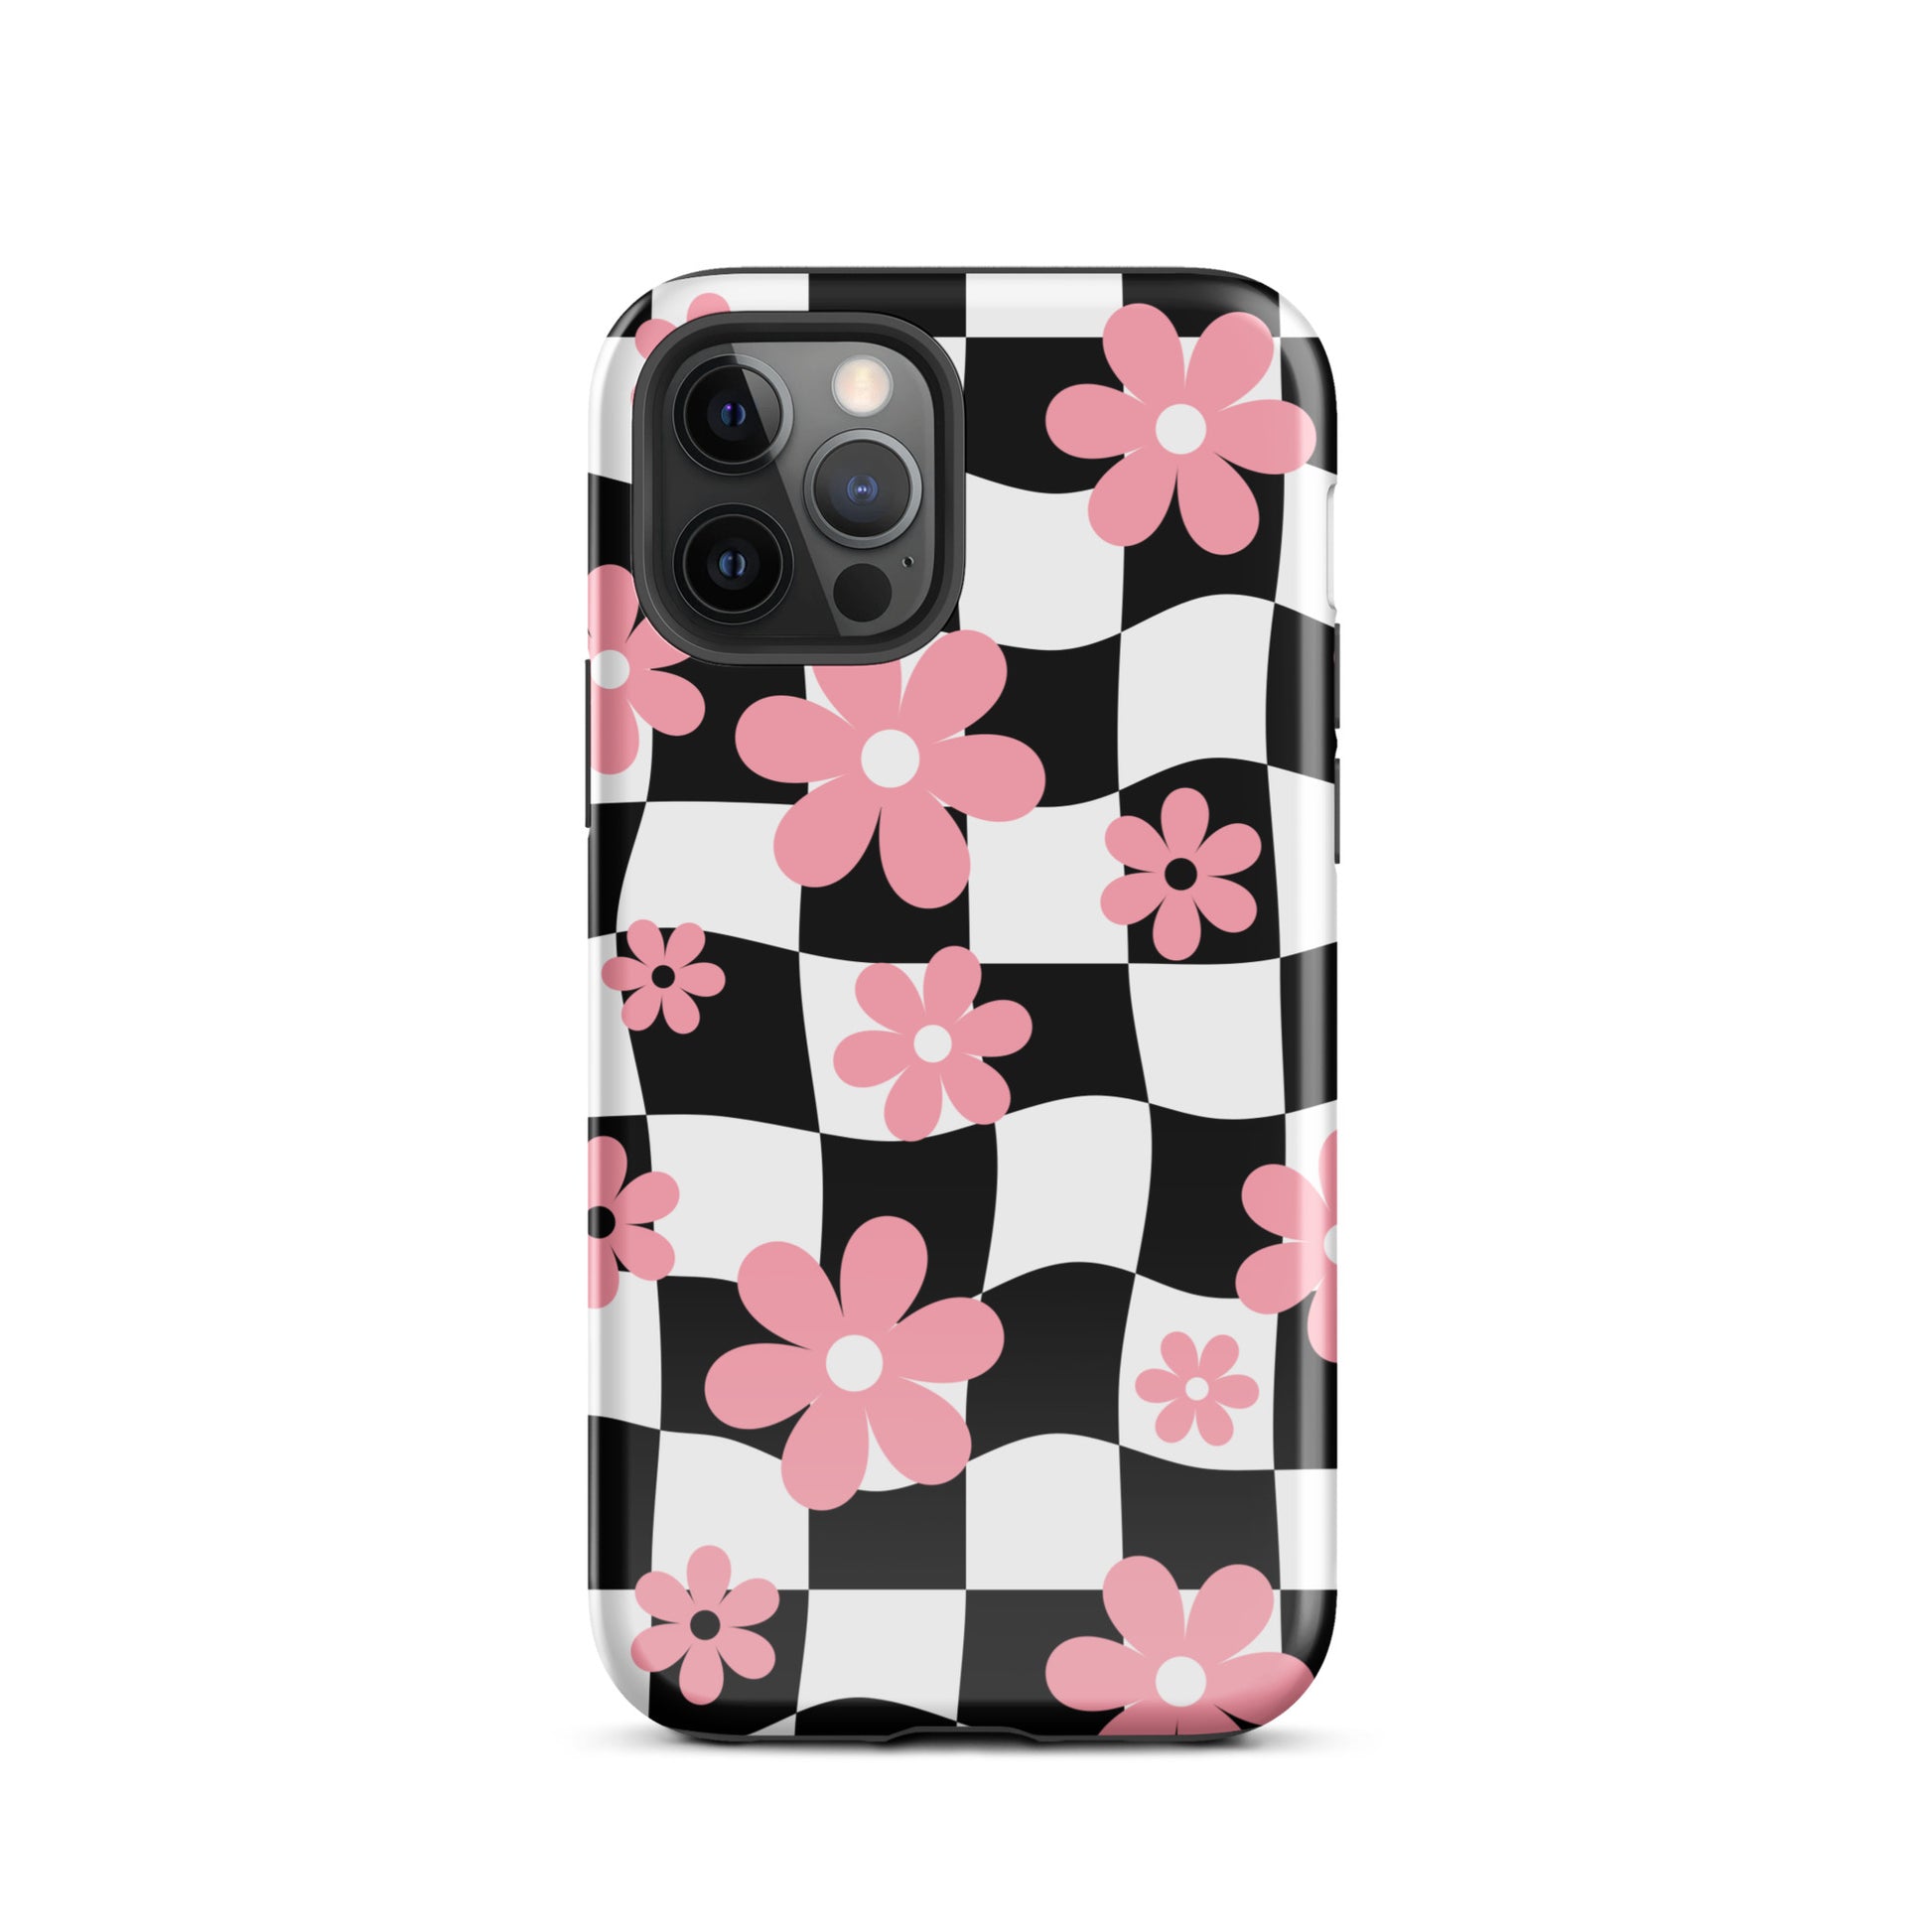 Floral Wavy Checkered iPhone Case iPhone 12 Pro Glossy